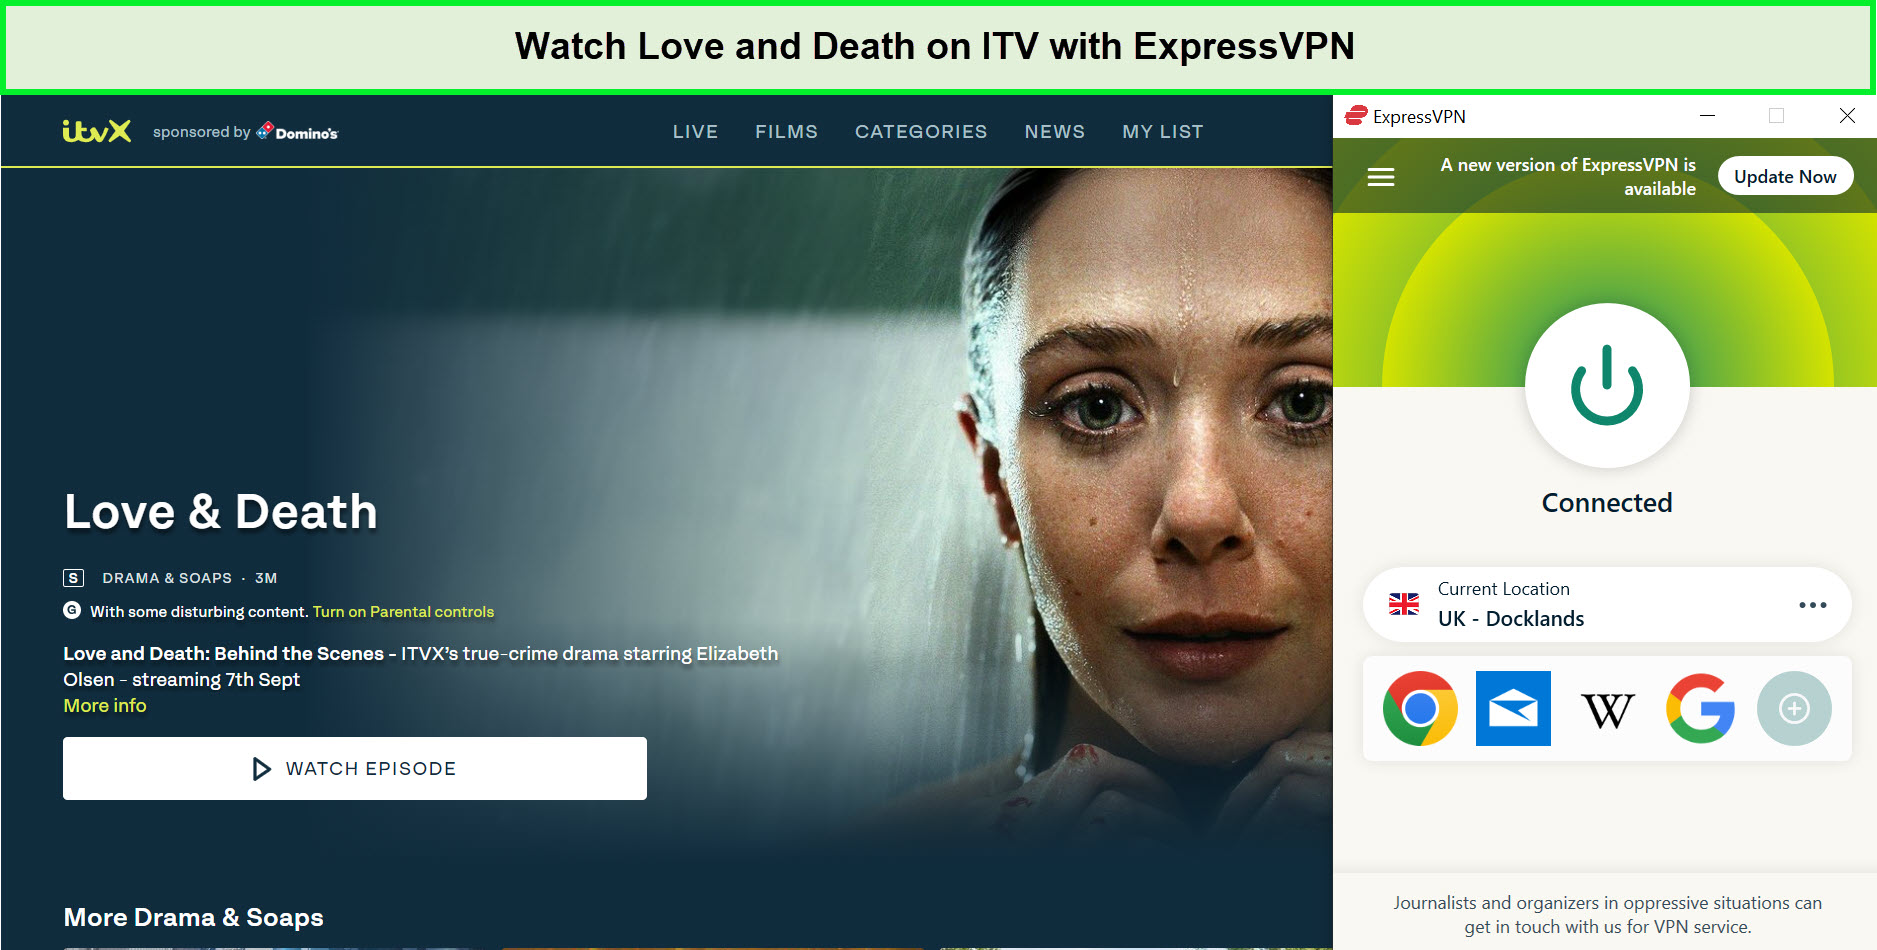 Watch-Love-and-Death-Outside-UK-on-ITV-with-ExpressVPN